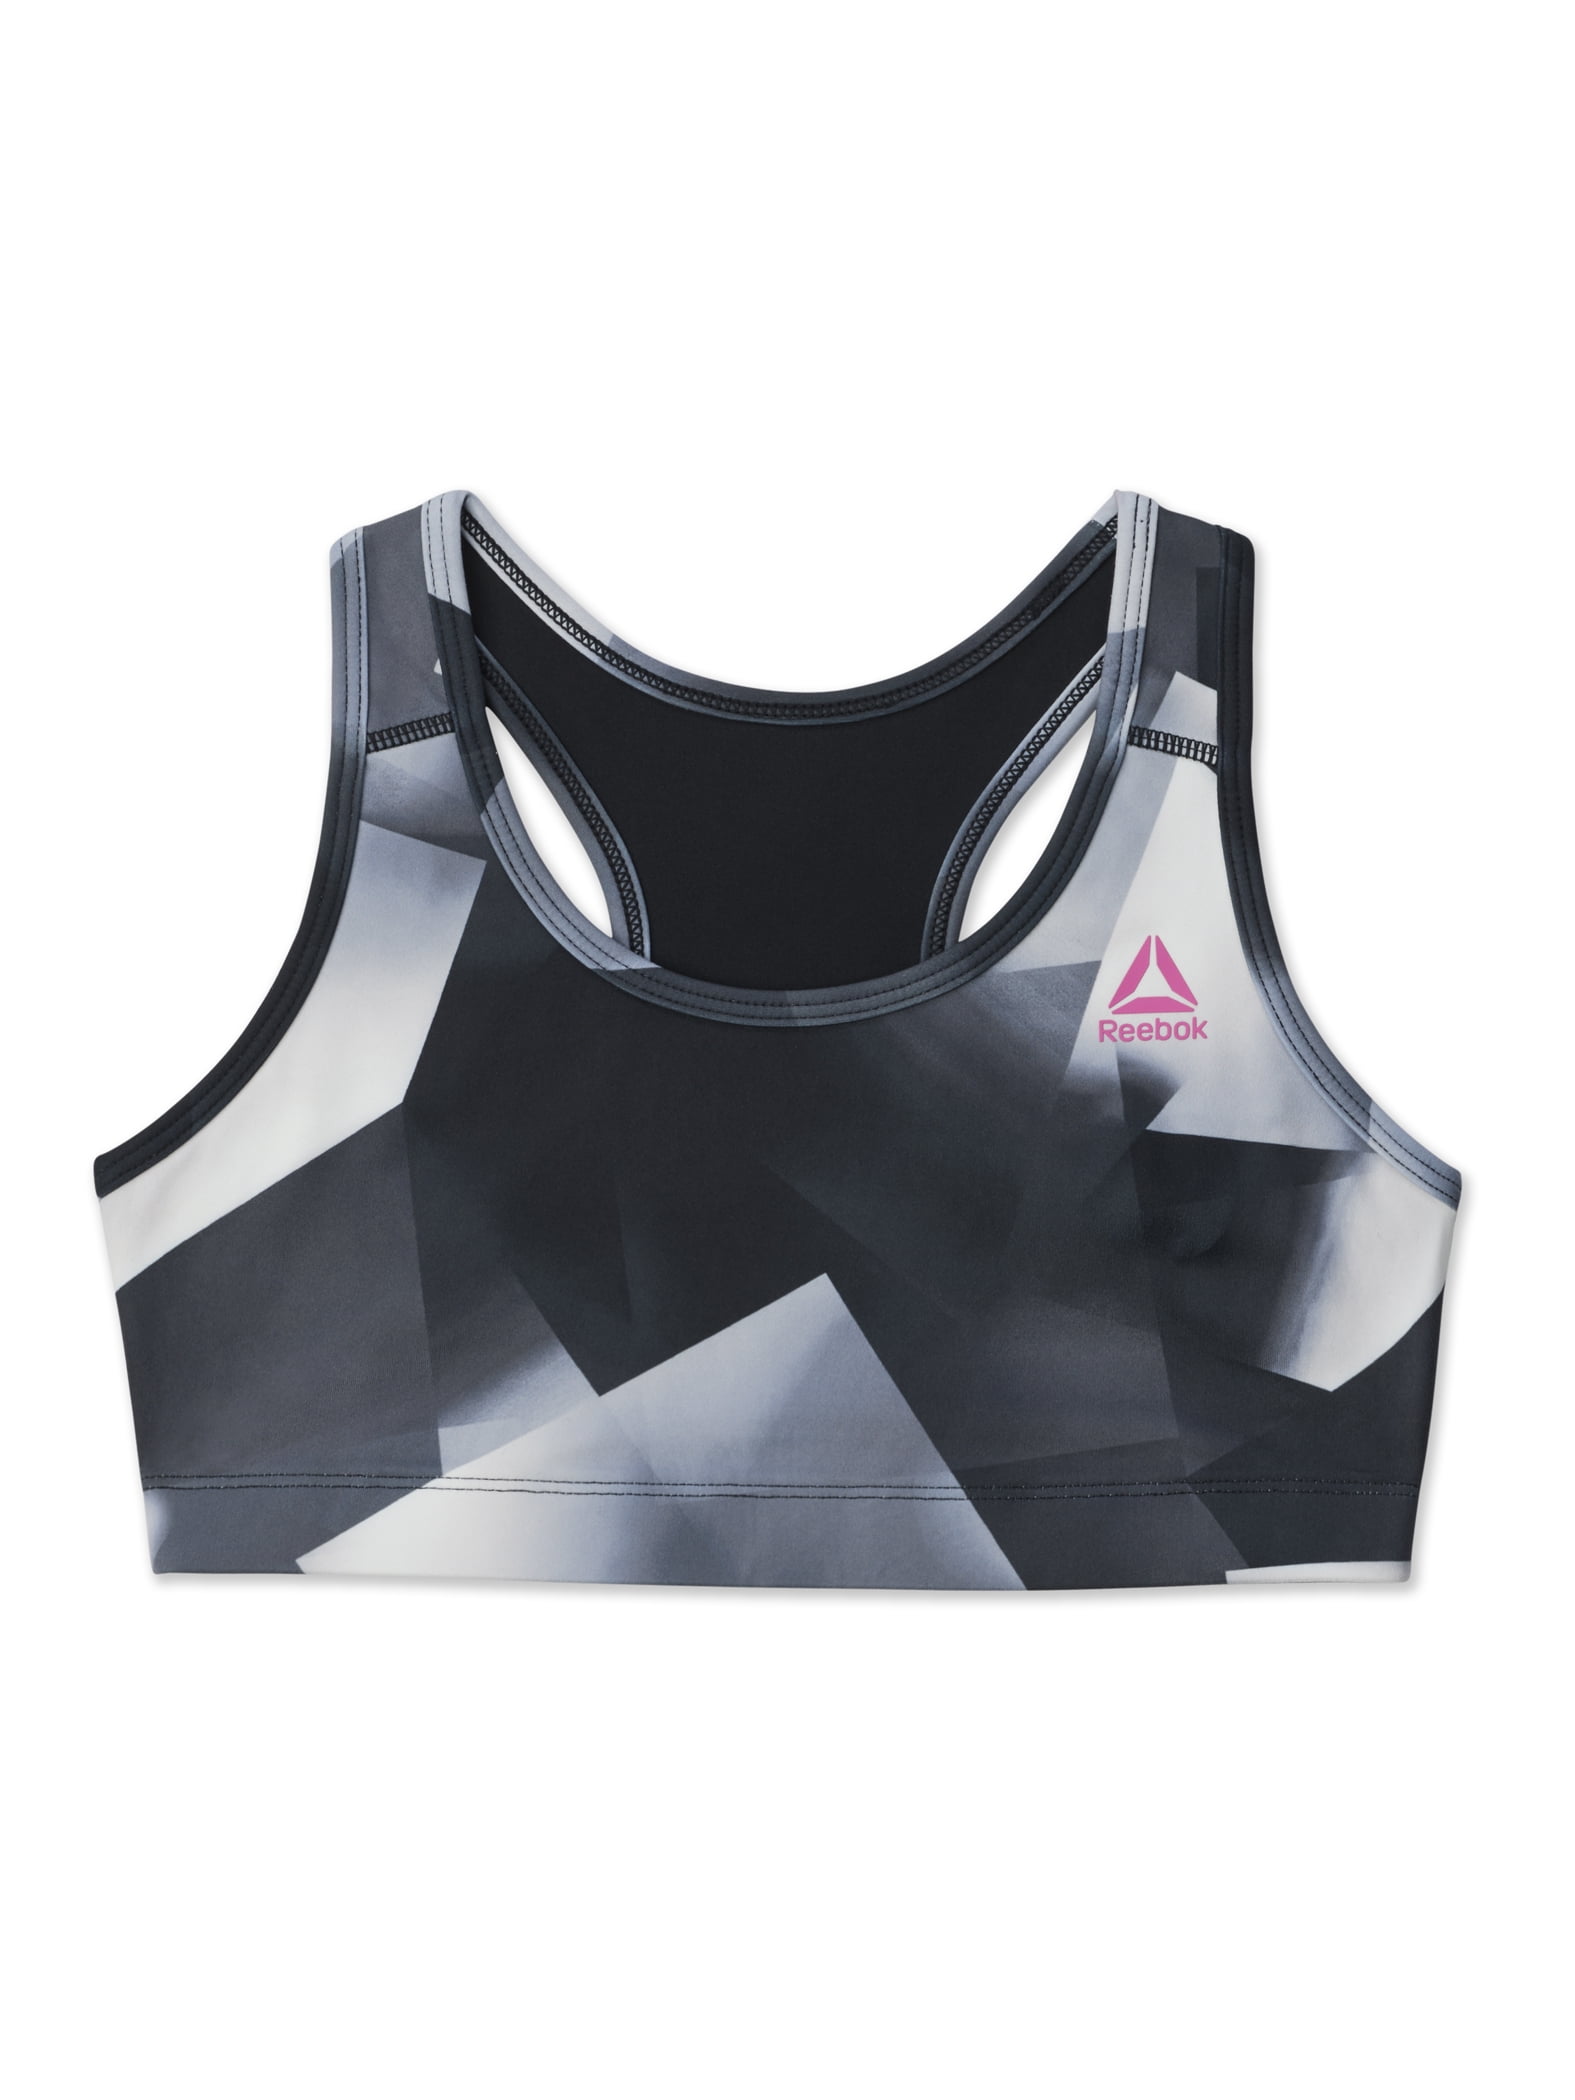 Reebok Girl's Active Ethereal Ombre Reversible Sports Bra, Sizes 4-18 